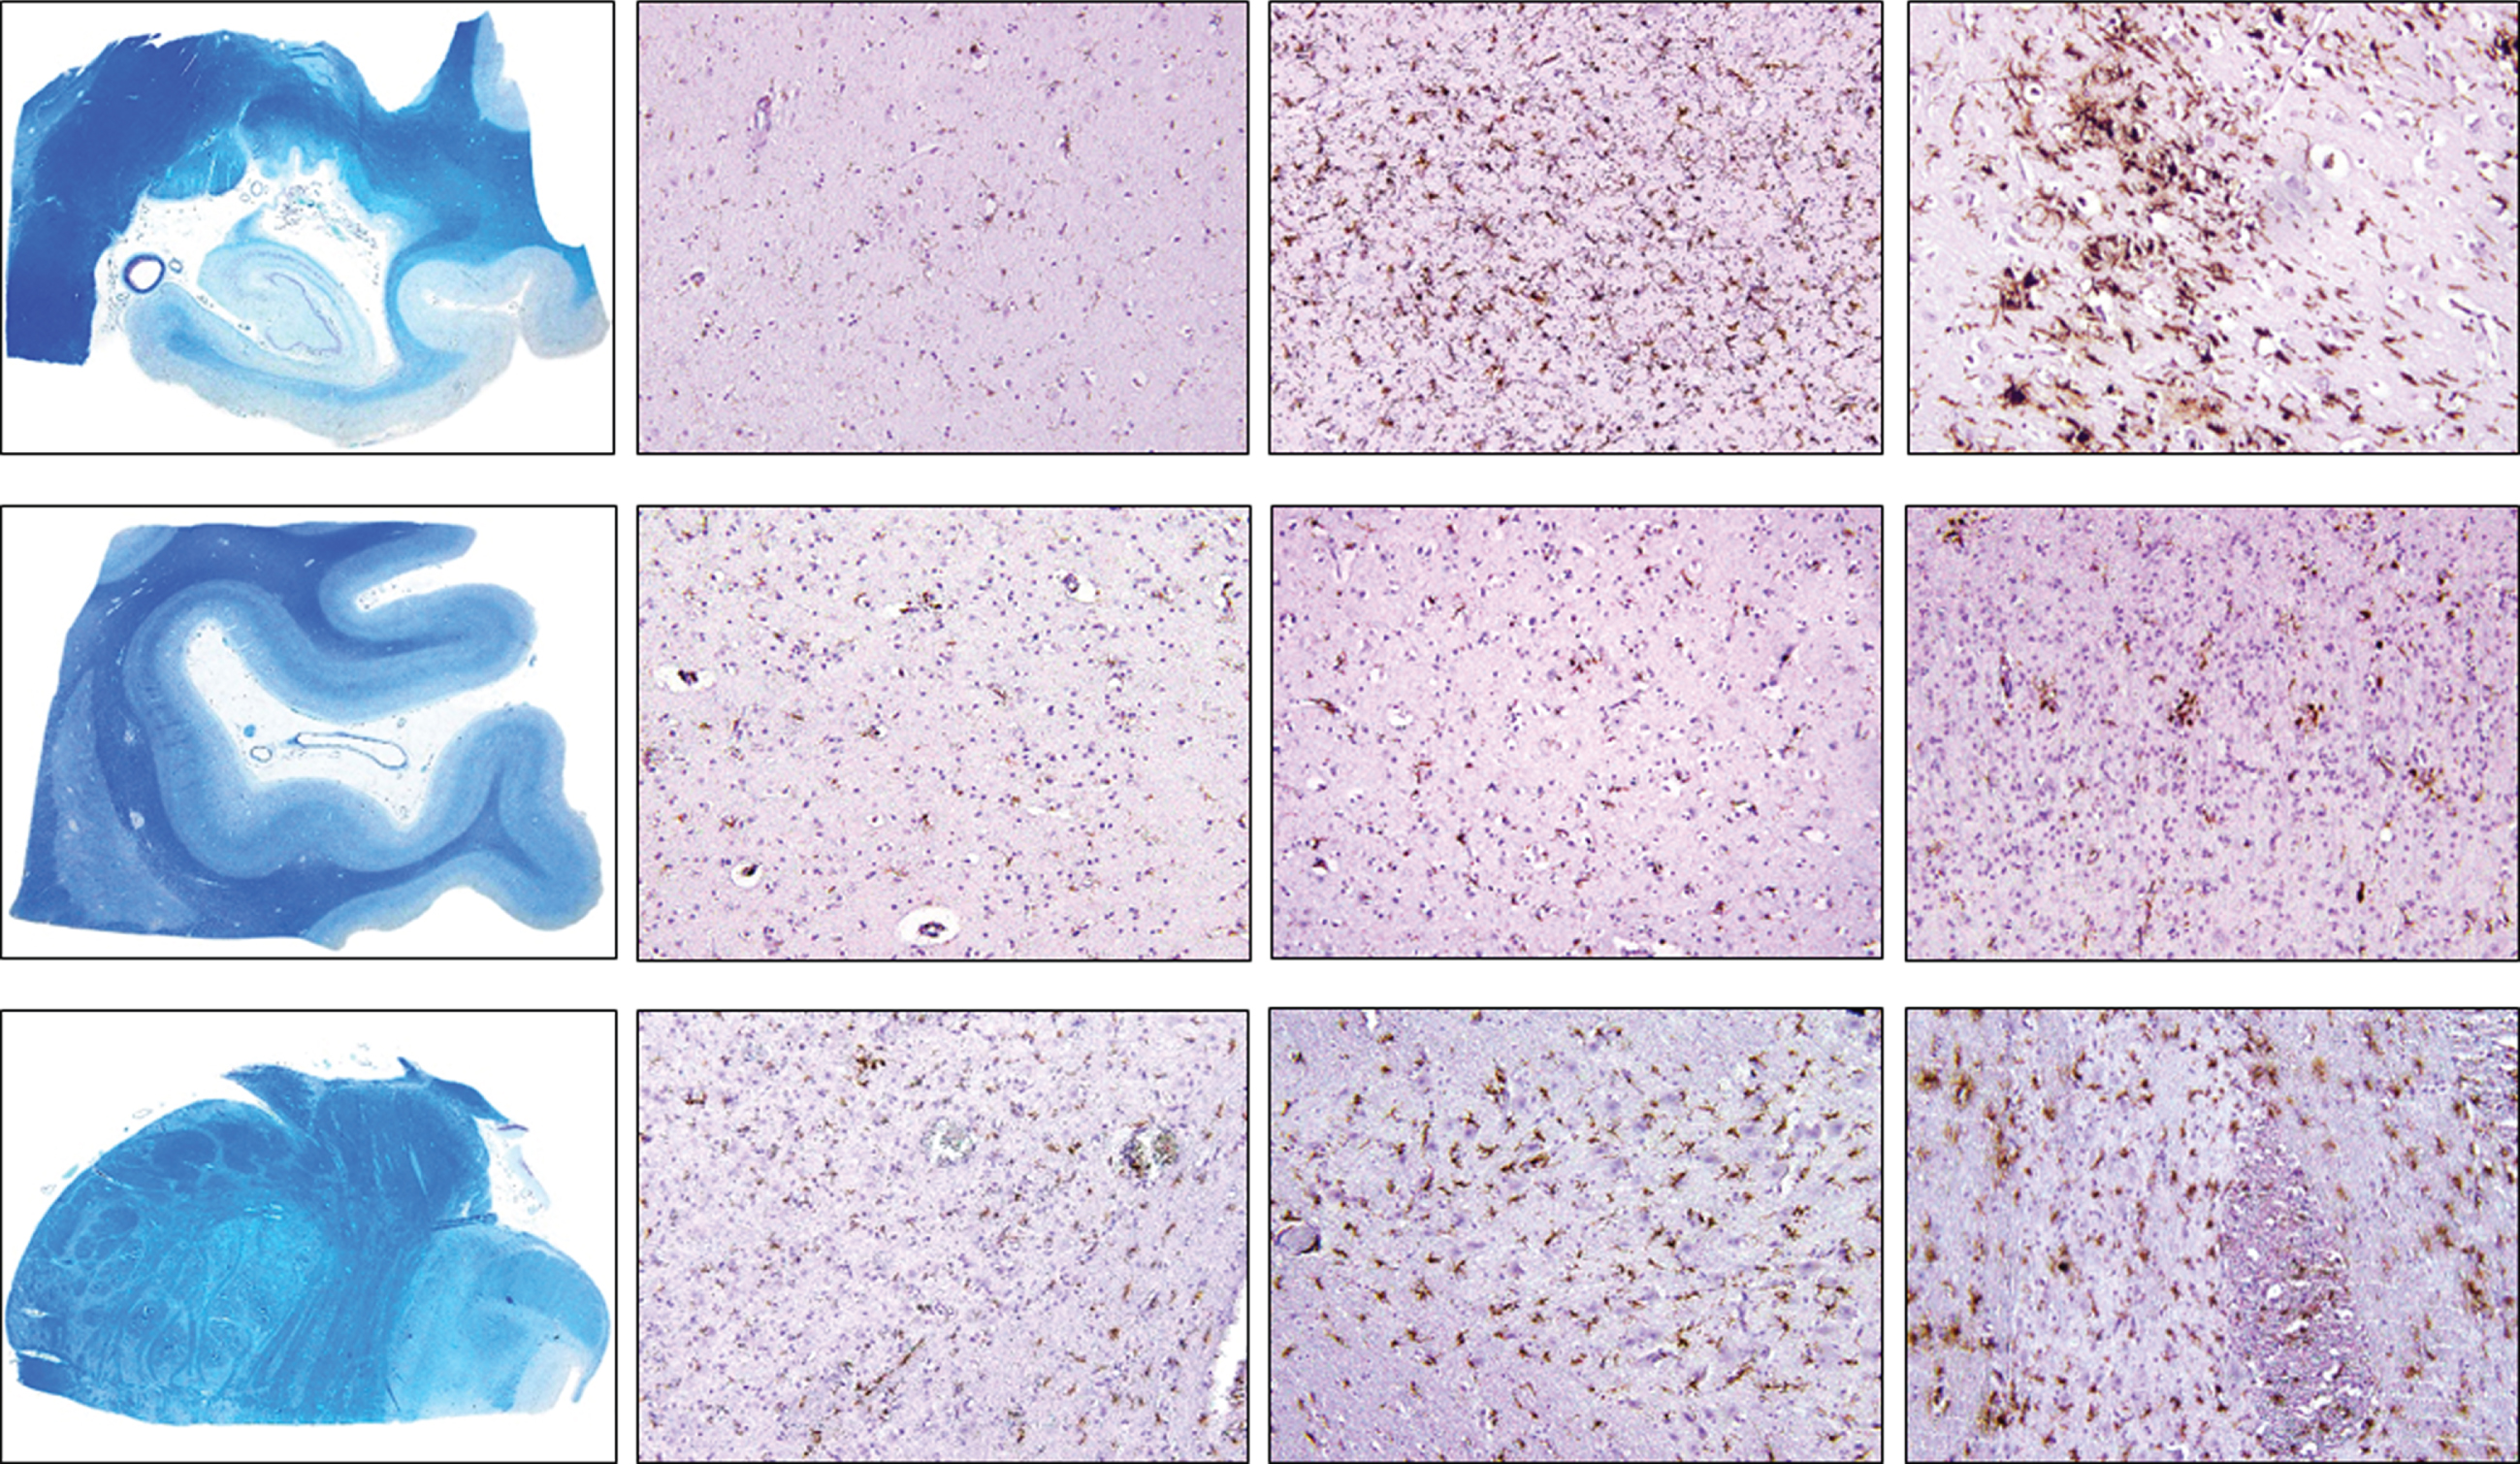 Density of CD68-positive cells in control, intermediate and late AD, respectively (upper row, hippocampus; middle row, occipital cortex, lower row, brainstem) (magnification 100x).